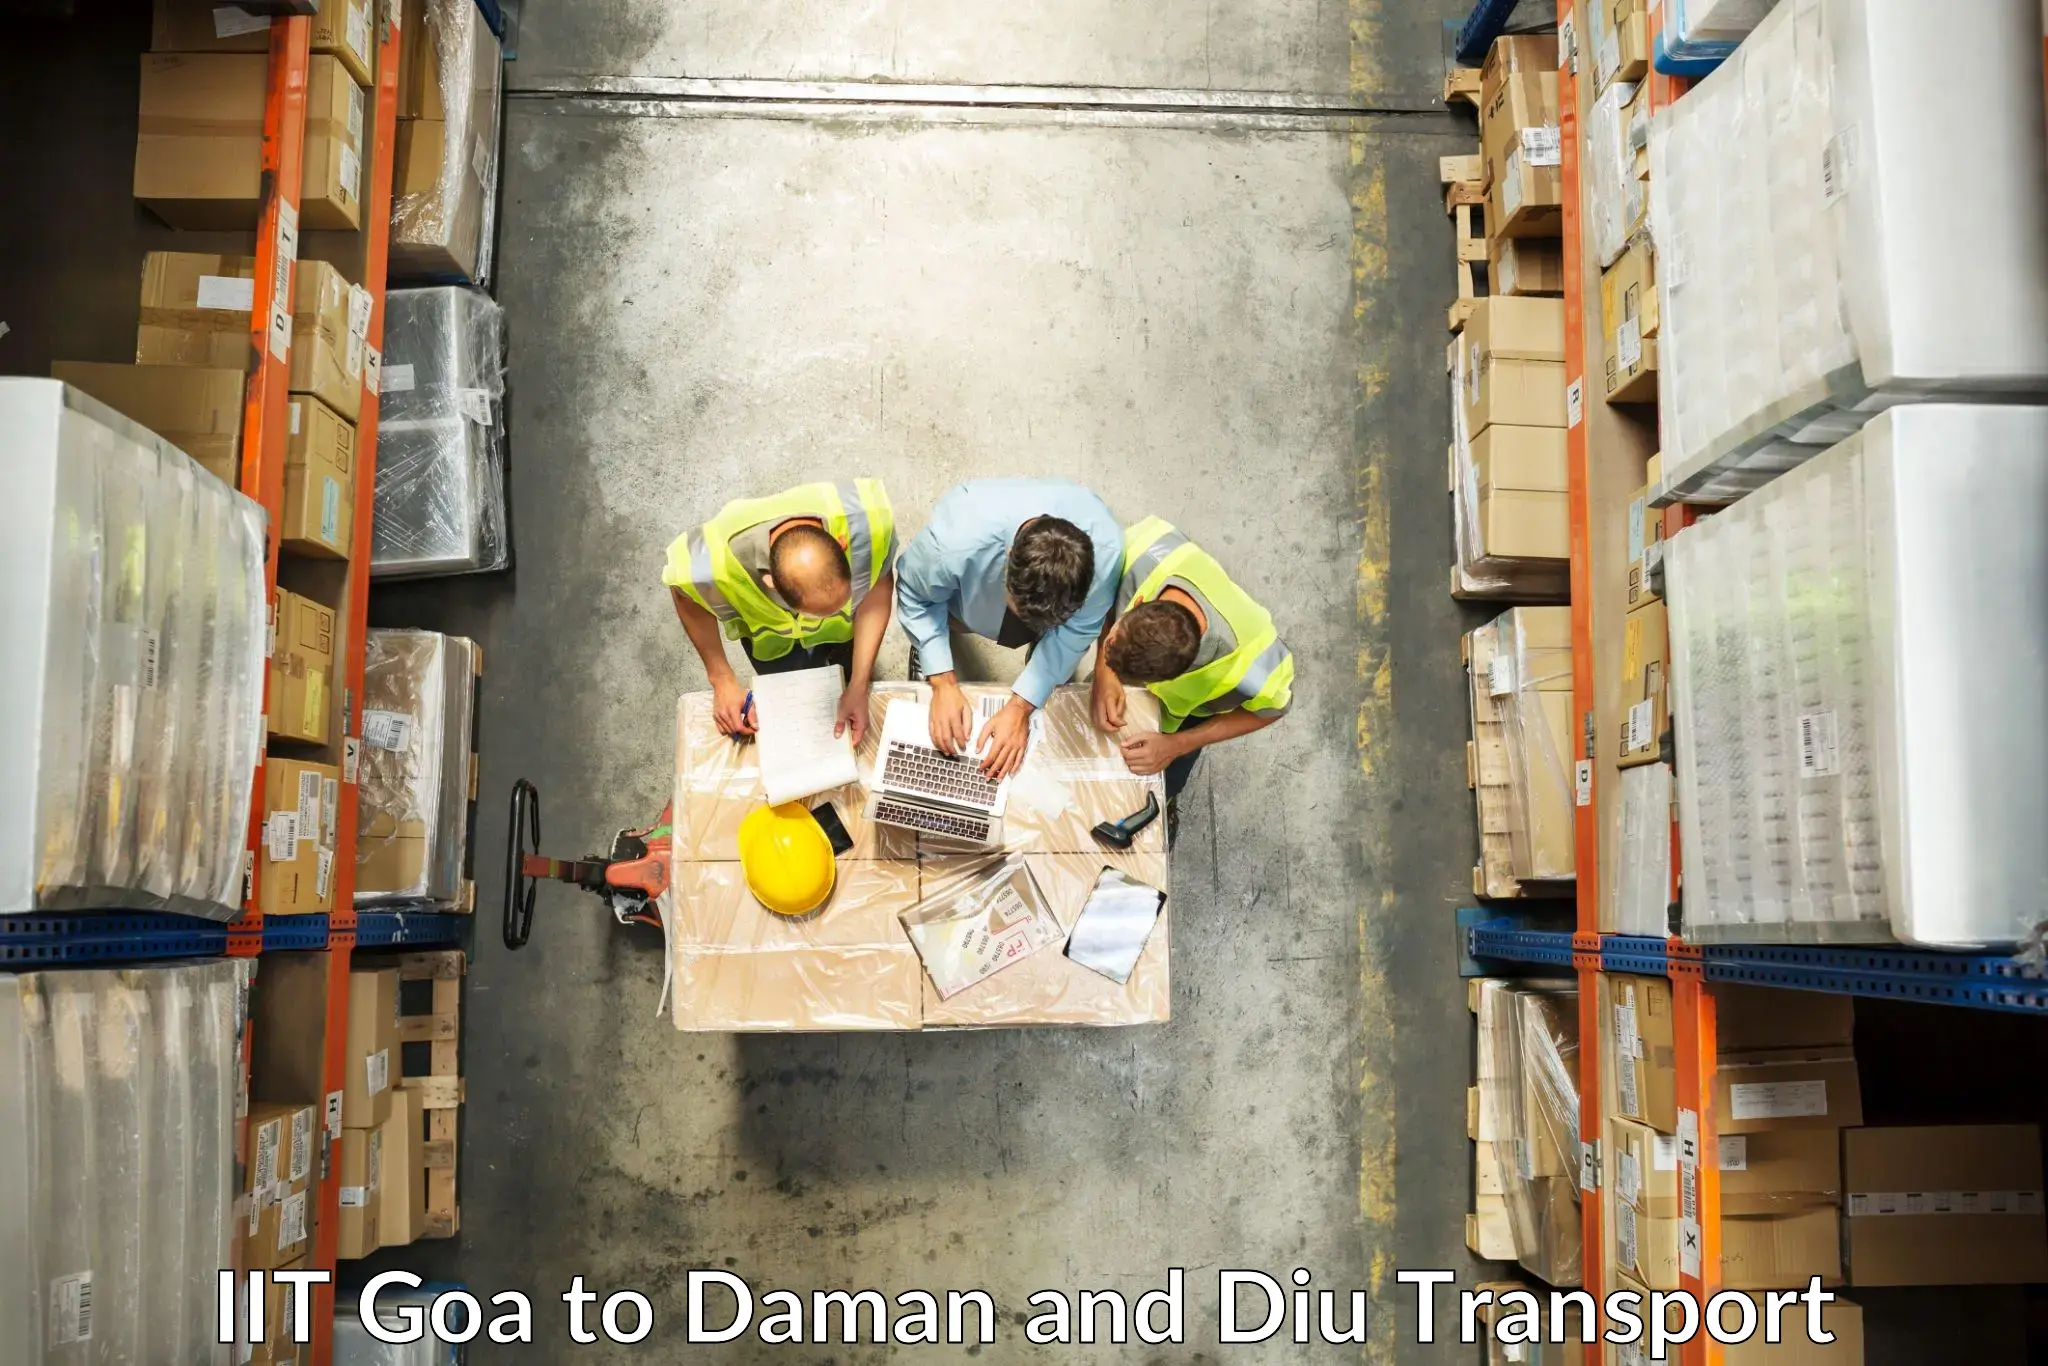 Shipping services IIT Goa to Daman and Diu